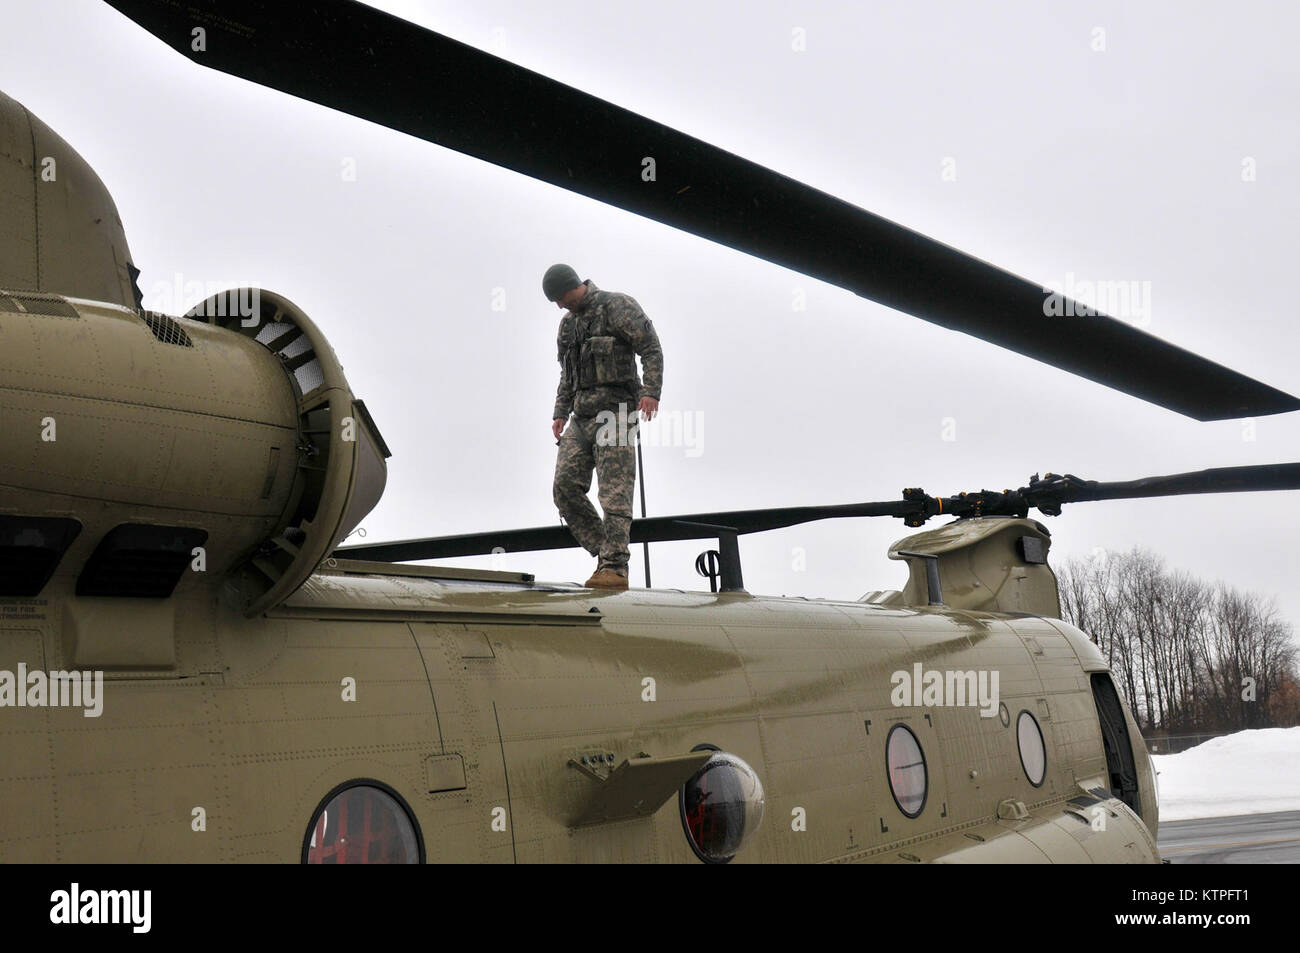 SYRACUSE, NY - Army Staff Sgt. Mike Landaur completes a safety check of a CH-47F Chinook Helicopter on March 14, 2015. Staff Sgt. Landaur is a CH-47F crew chief from Company B, 3rd Battalion, 126th Aviation based at the Army Aviation Support Facility at Rochester International Airport. 30 Airmen from the 274th Air Support Operations Squadron (ASOS), based at Hancock Field Air National Guard Base and the Army aircrew trained together for the first time. The training included Joint Terminal Attack Controller (or JTAC) Airmen from the 274th ASOS conducting CH-47 helicopter familiarization trainin Stock Photo